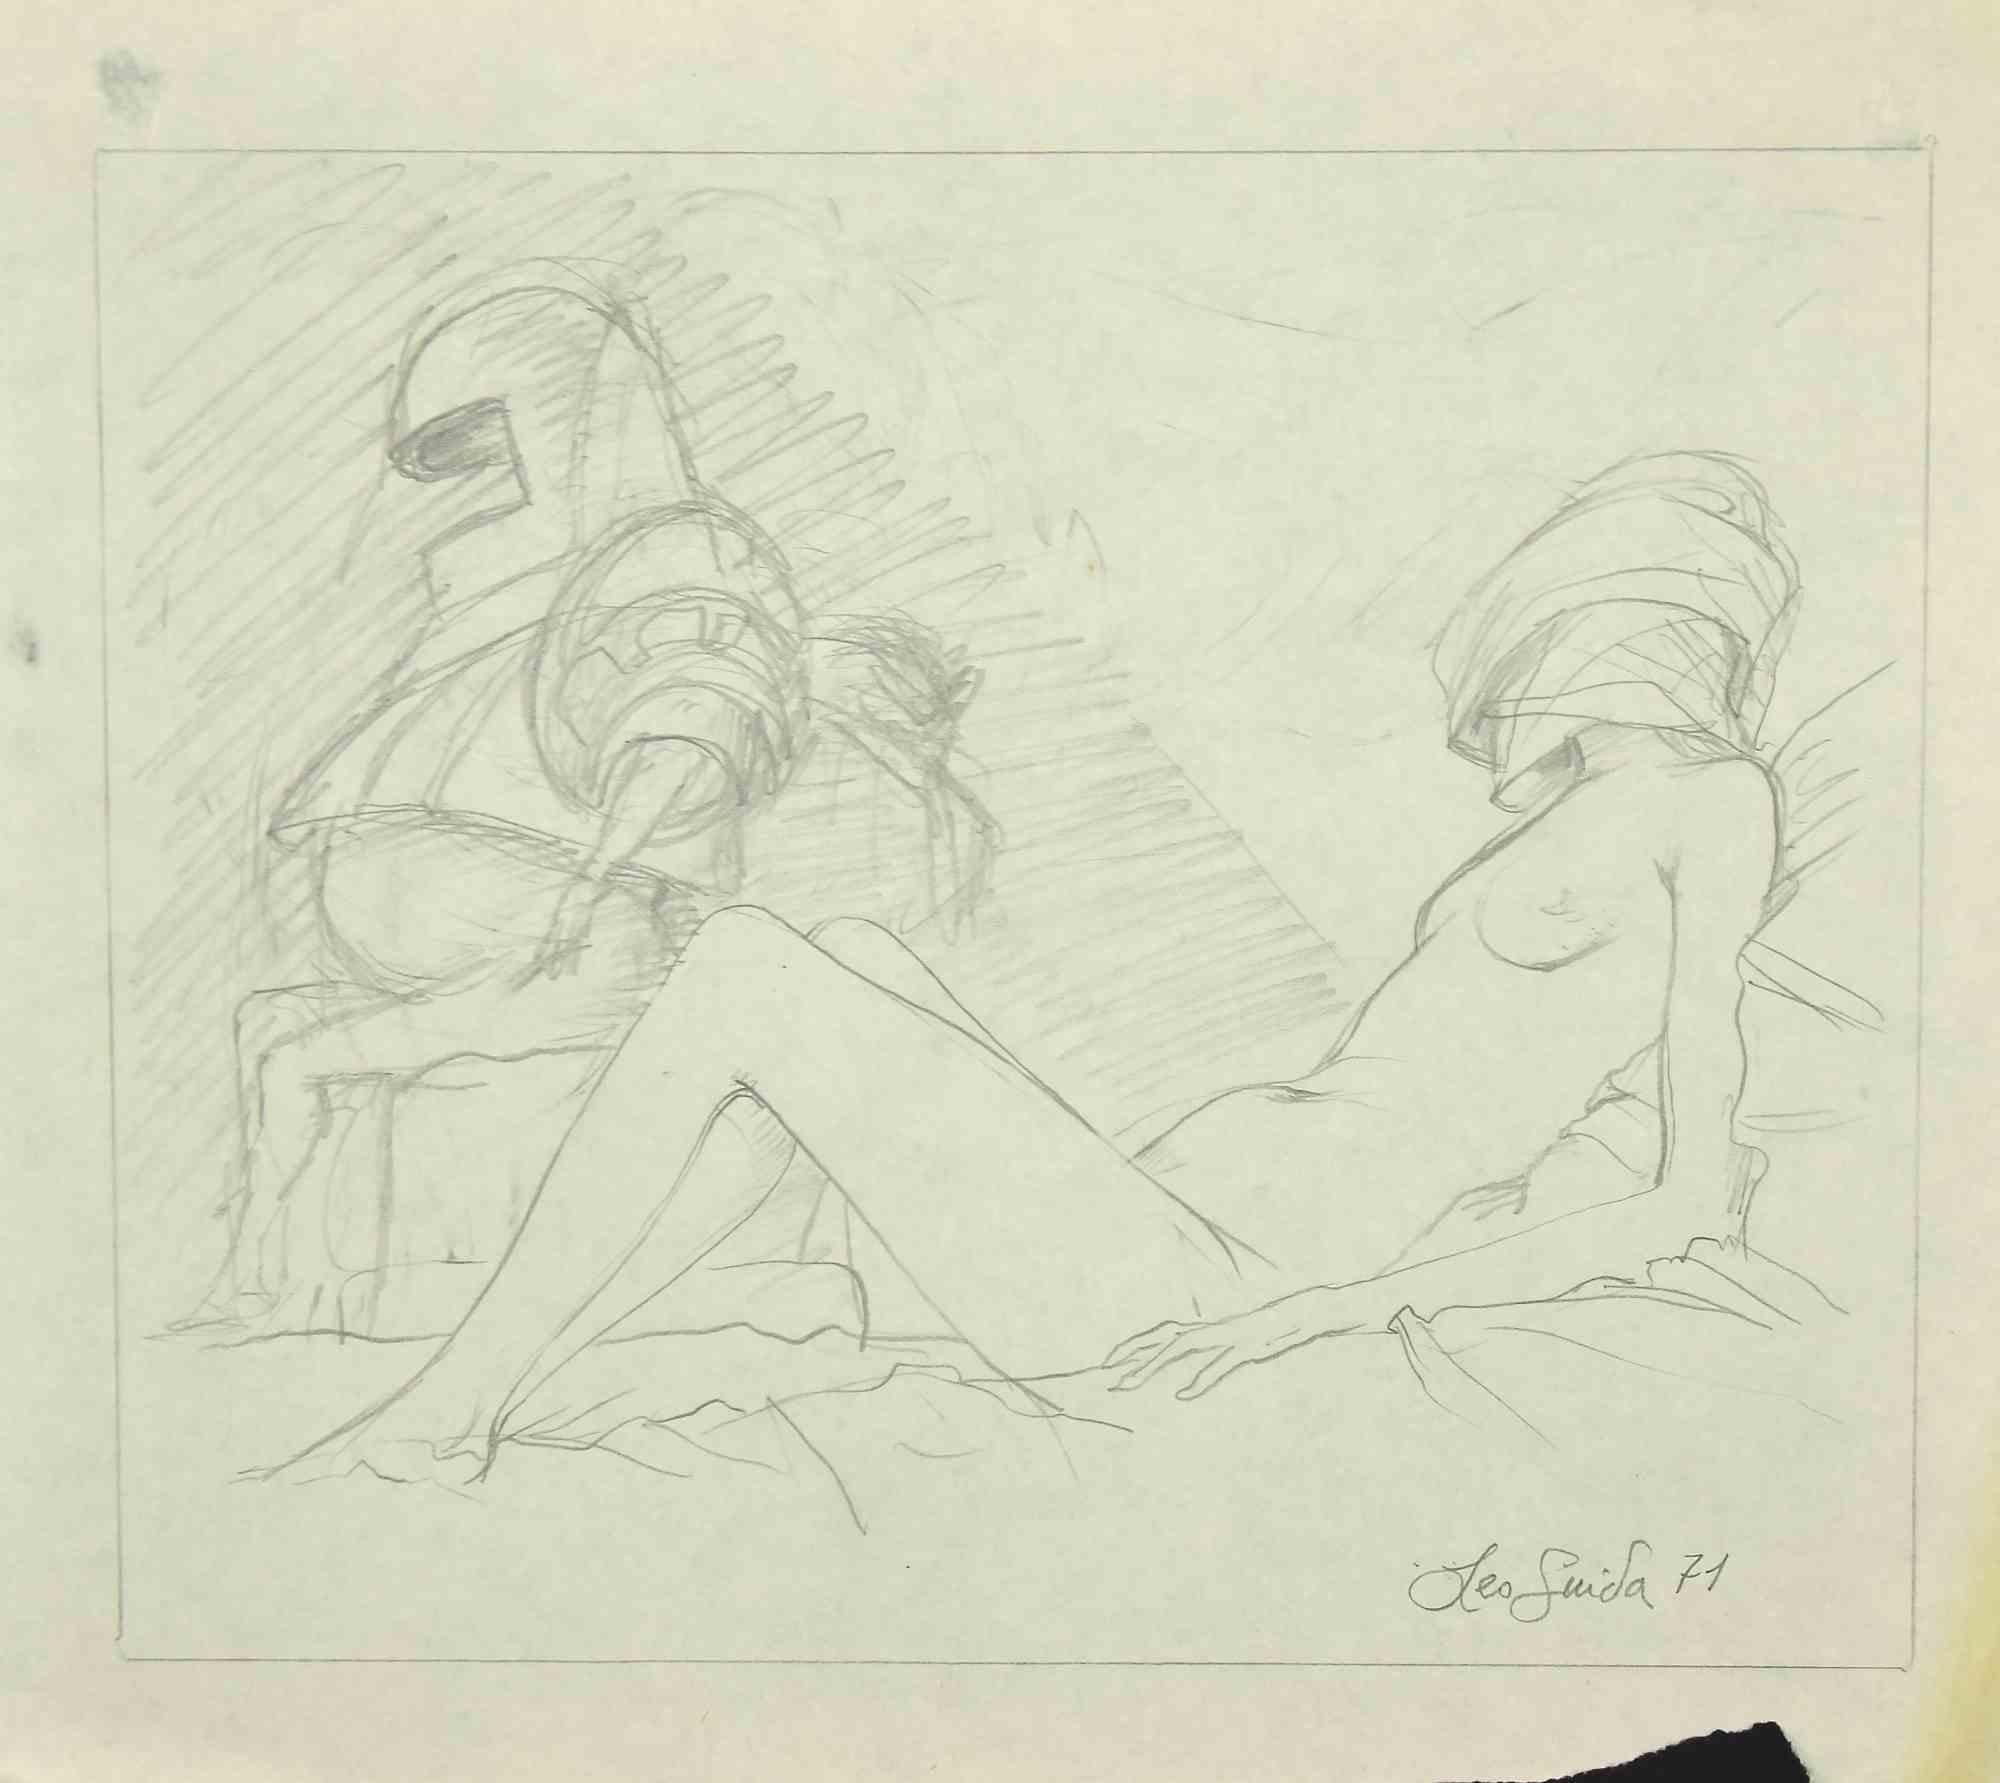 The Rest is an original drawing in pencil realized by Leo Guida in 1972.

Good condition except for being aged and a cutaway on the lower margin.

Leo Guida  (1992 - 2017). Sensitive to current issues, artistic movements and historical techniques,